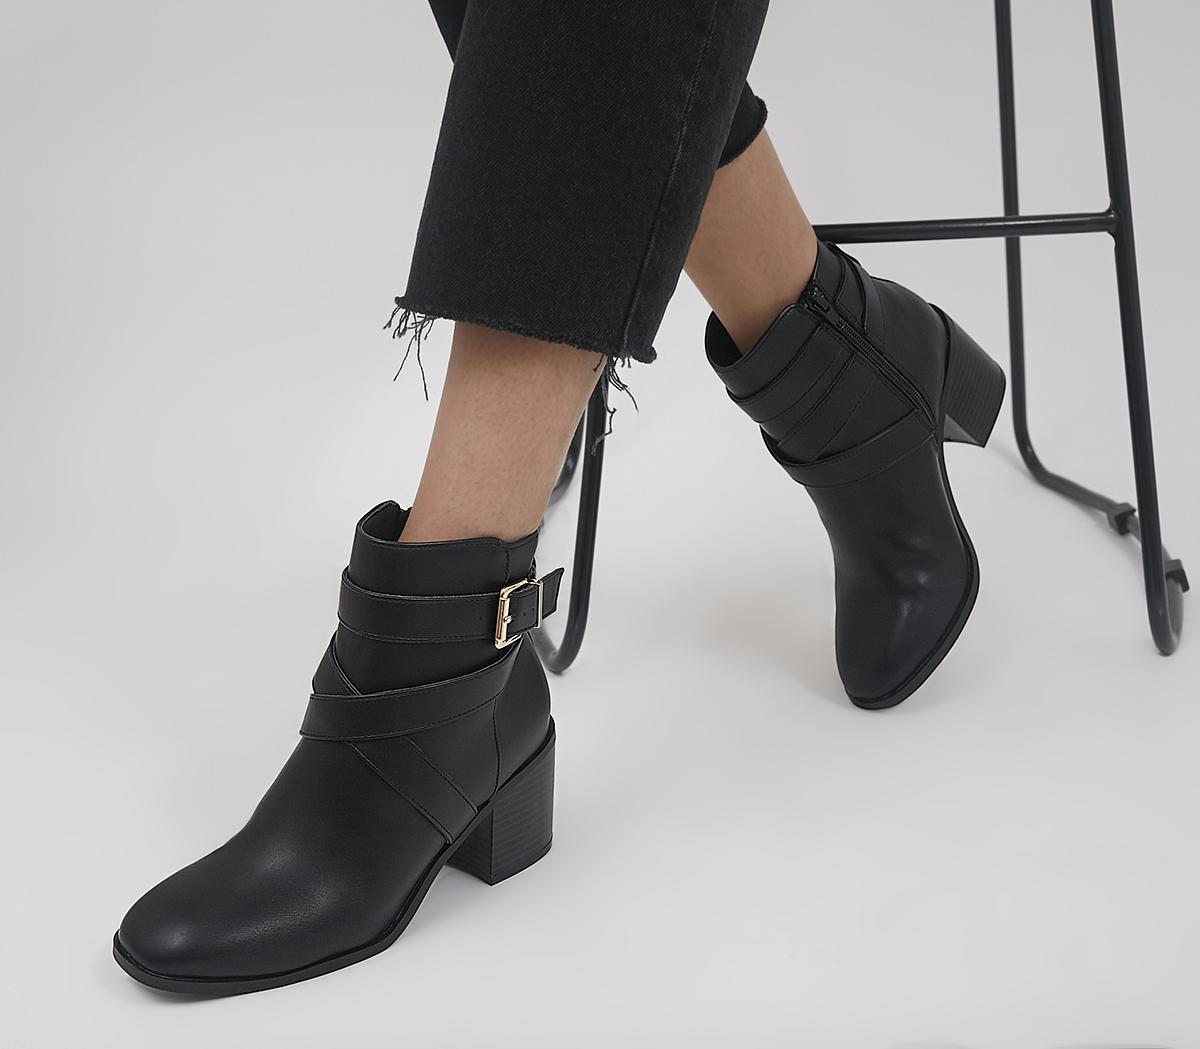 OfficeArtini Cross Strap Block Heeled Ankle BootsBlack